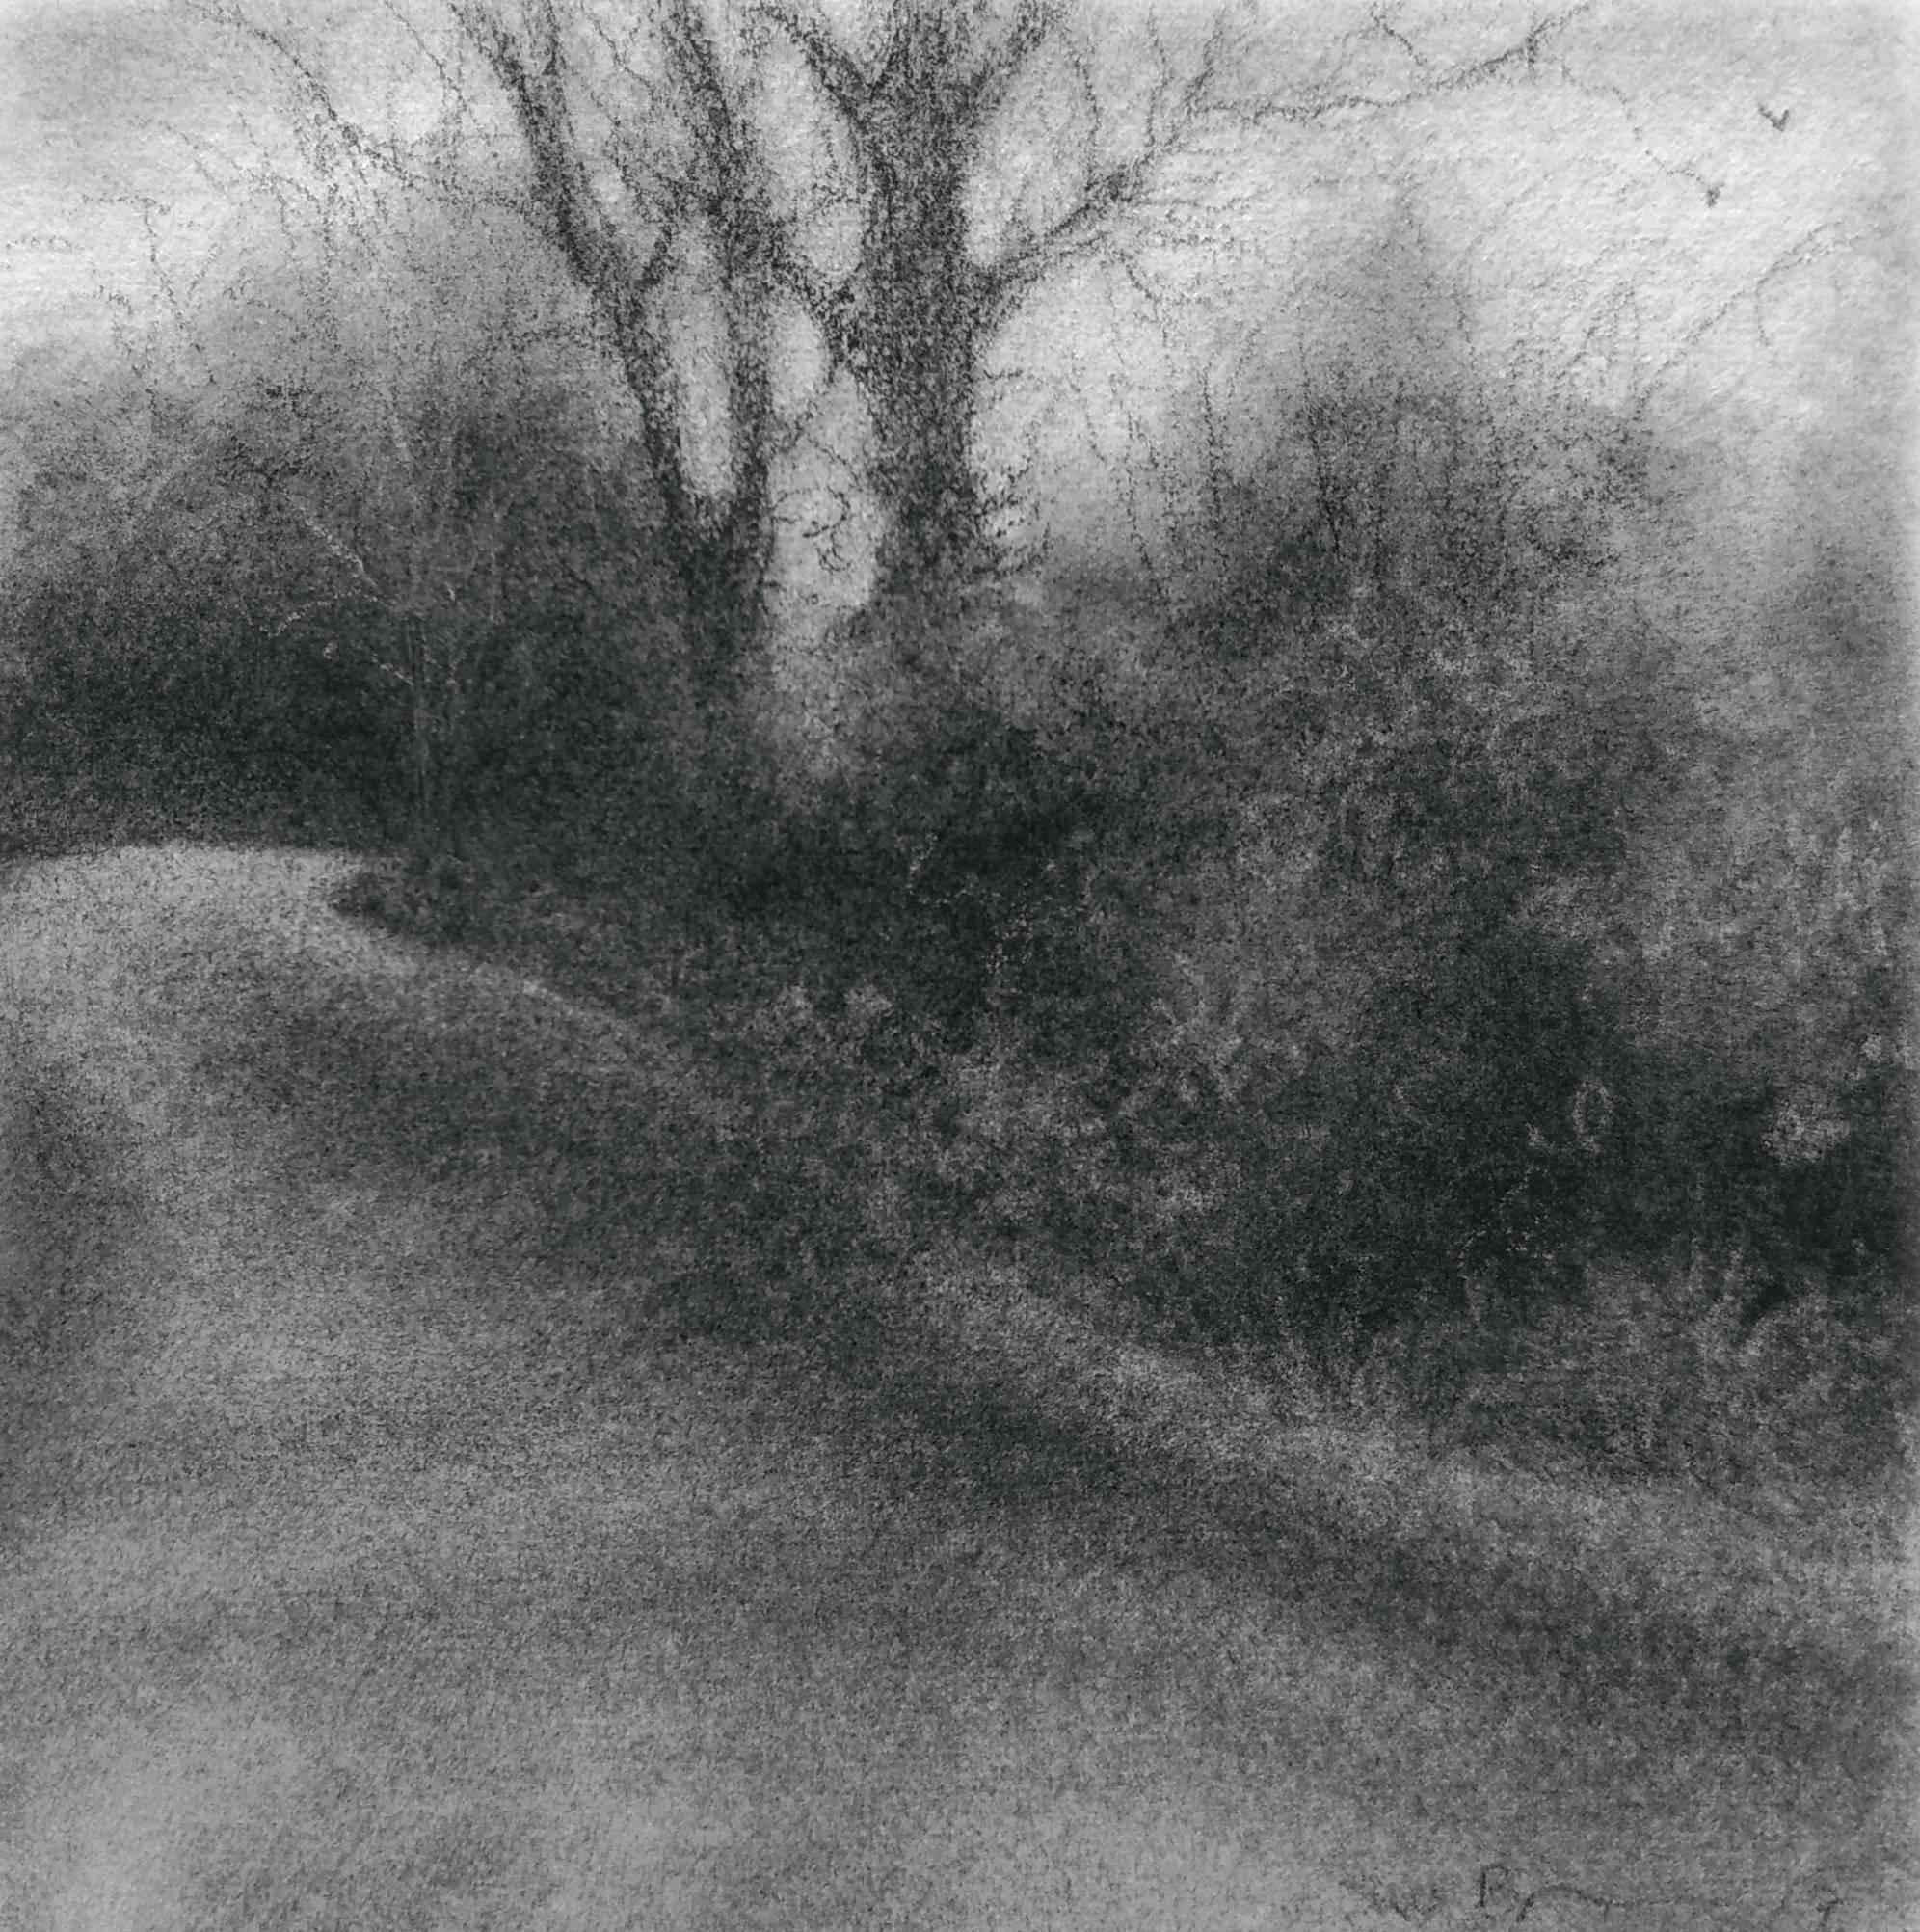 Sue Bryan Landscape Art - Edgeland XLVII (Modern, Square Charcoal Landscape Drawing of Country Road)